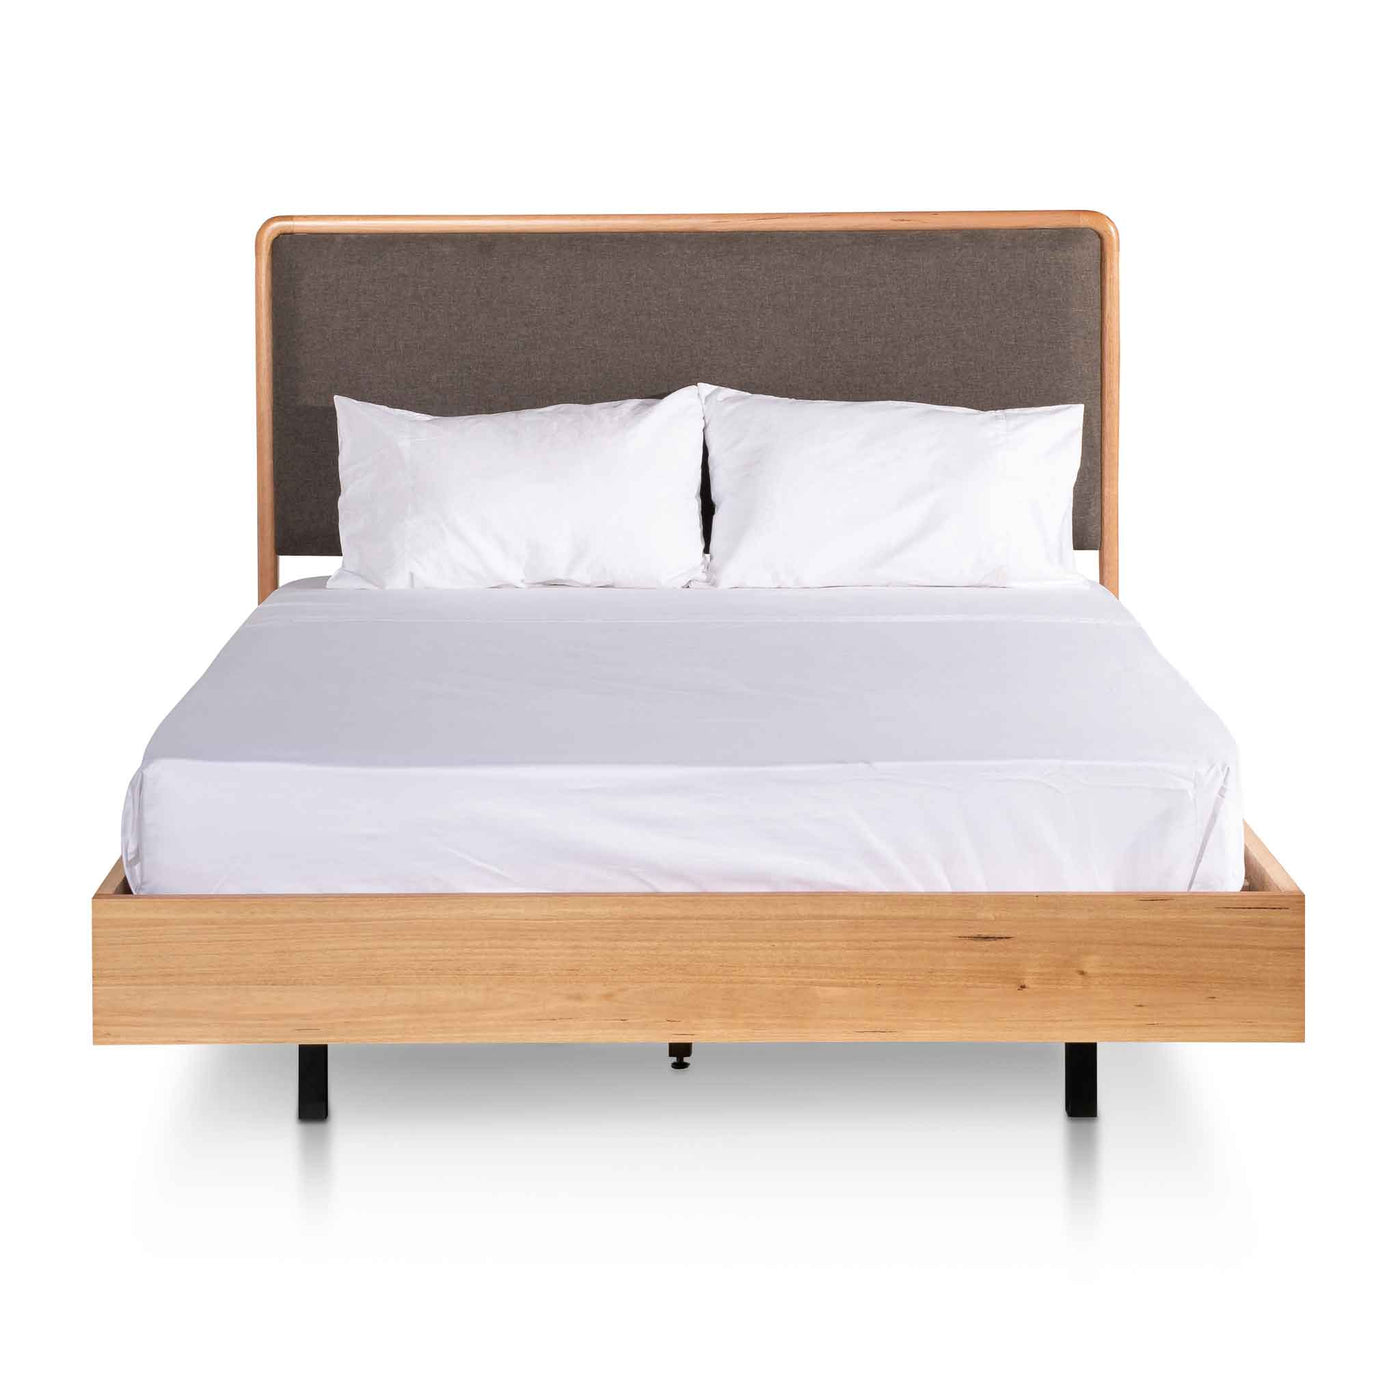 Queen Sized Bed Frame - Messmate